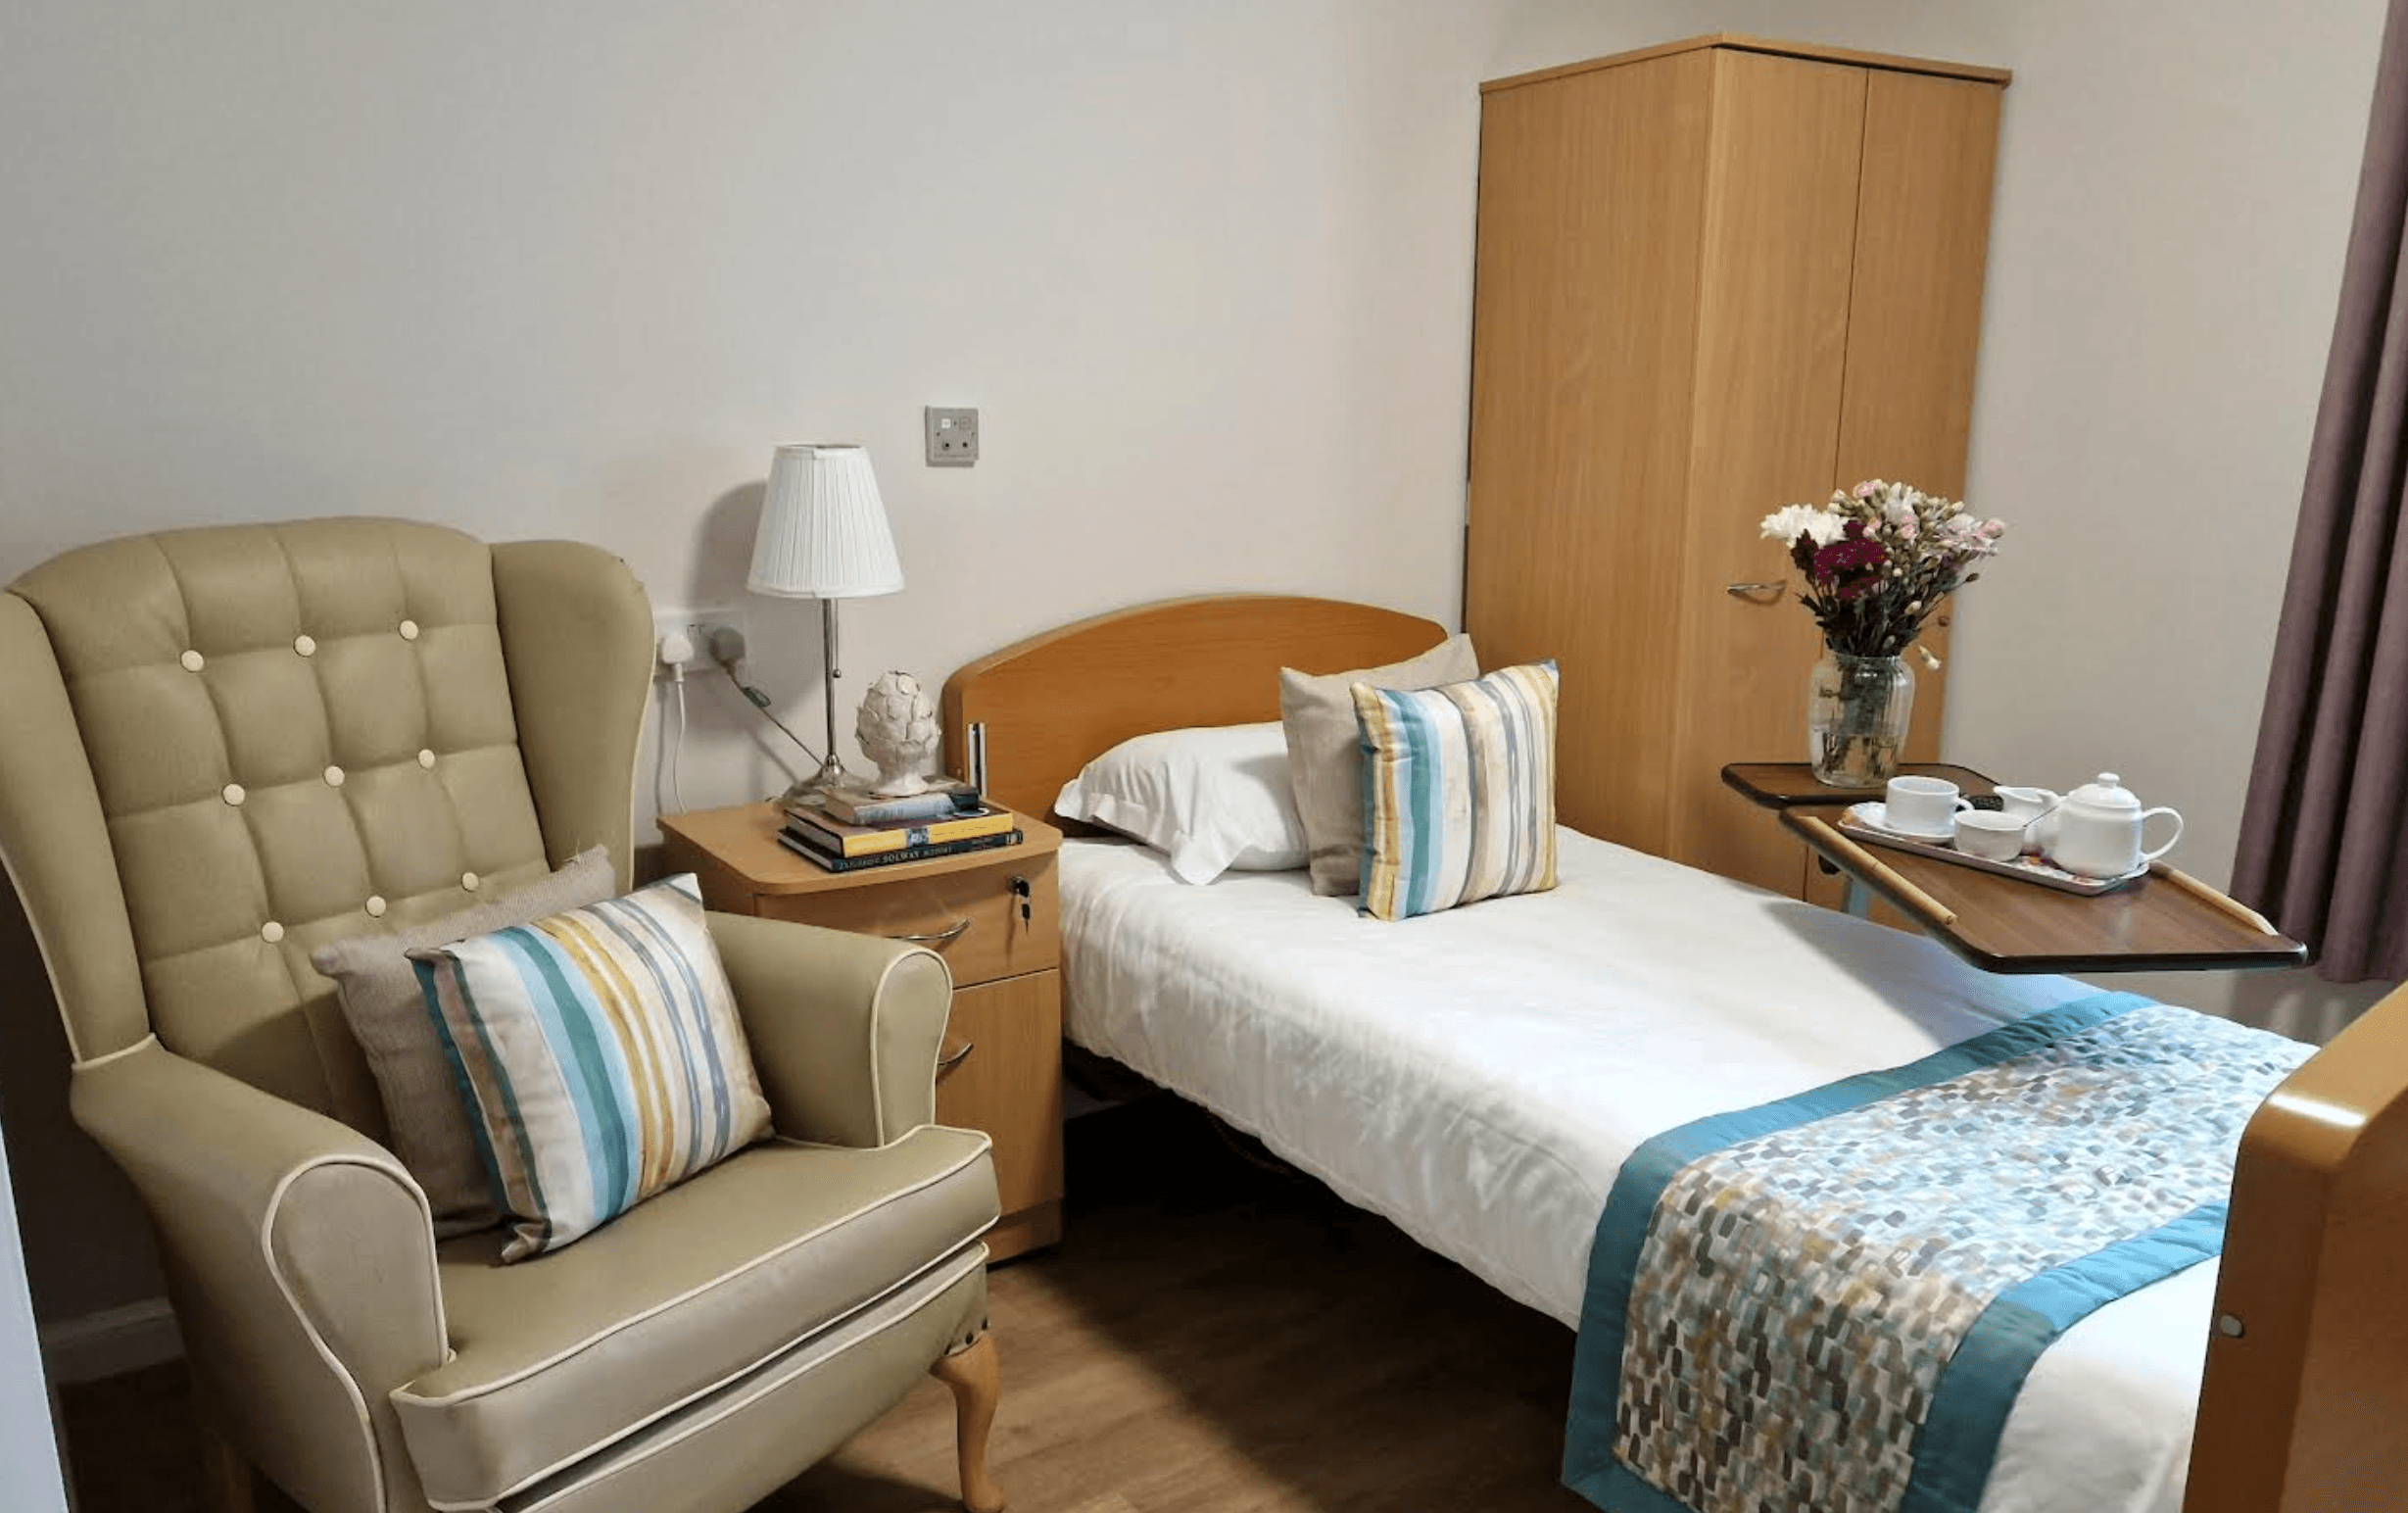 Bedroom of Annan Court Care Home in Annan, Scotland